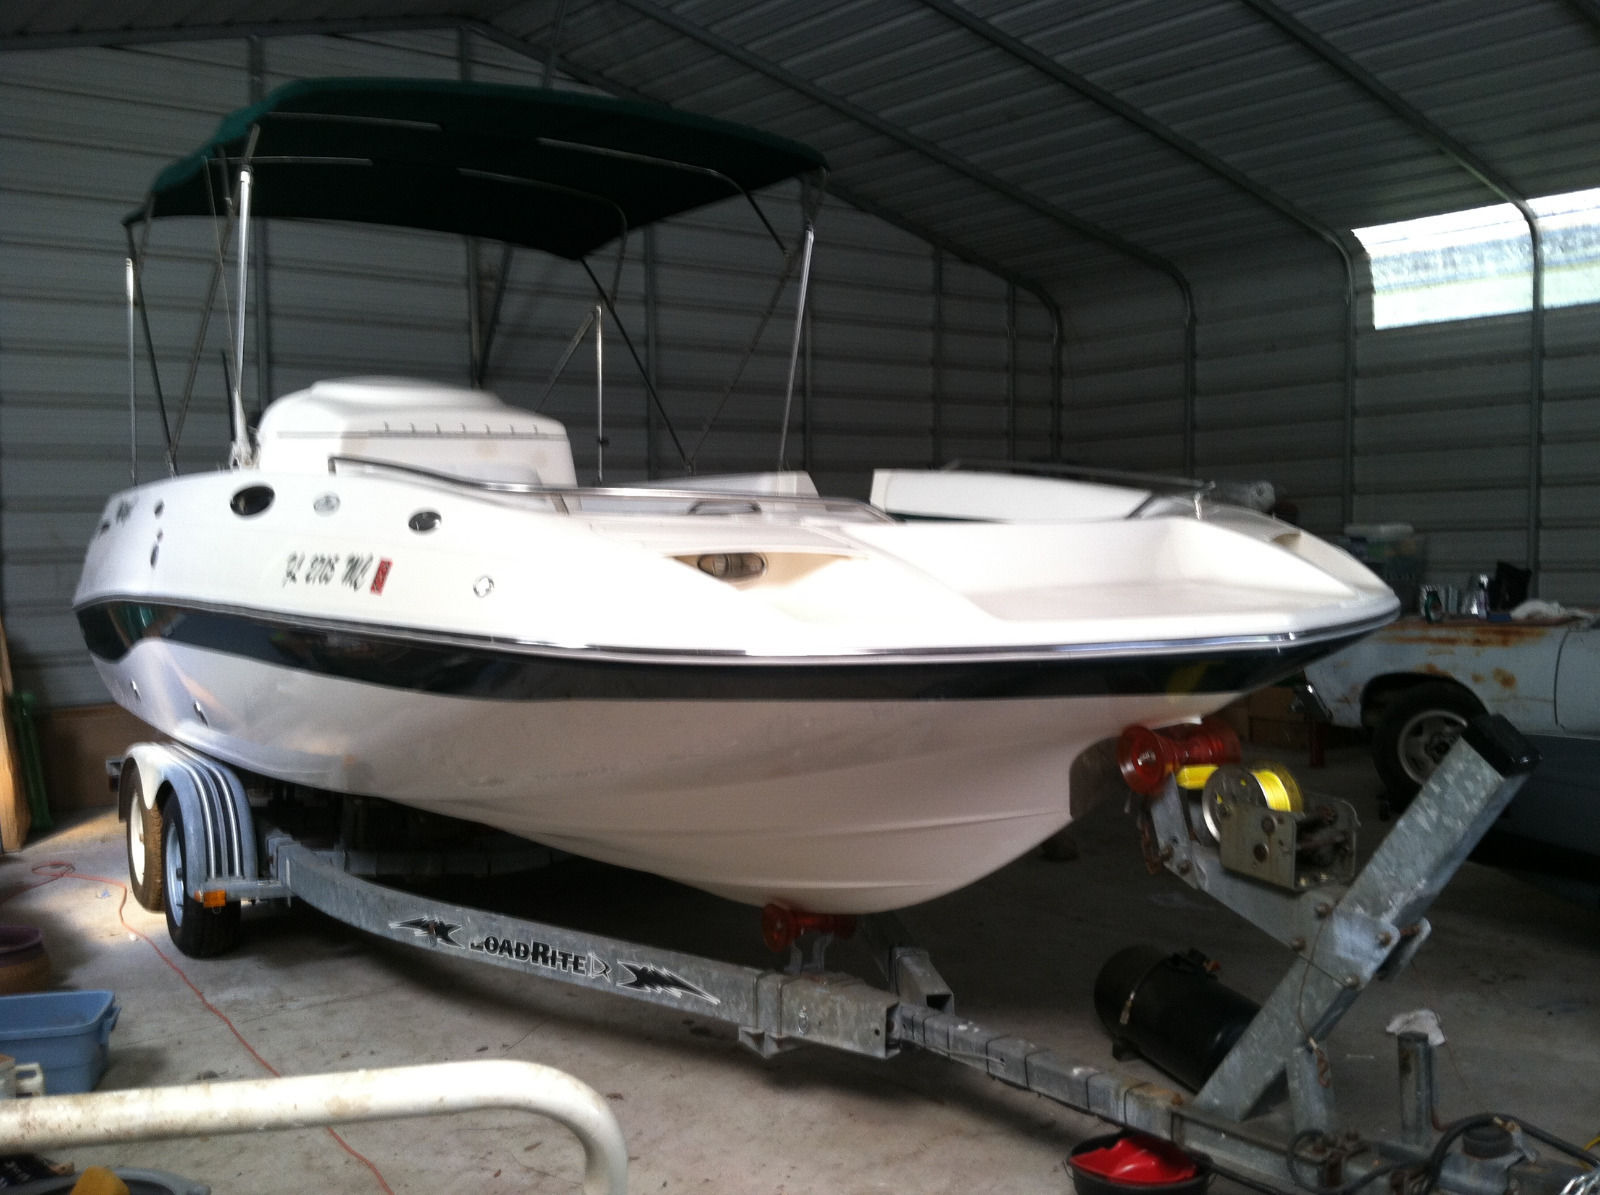 HARRIS/KAYOT SUPERDECK 226 2003 for sale for $500 - Boats 